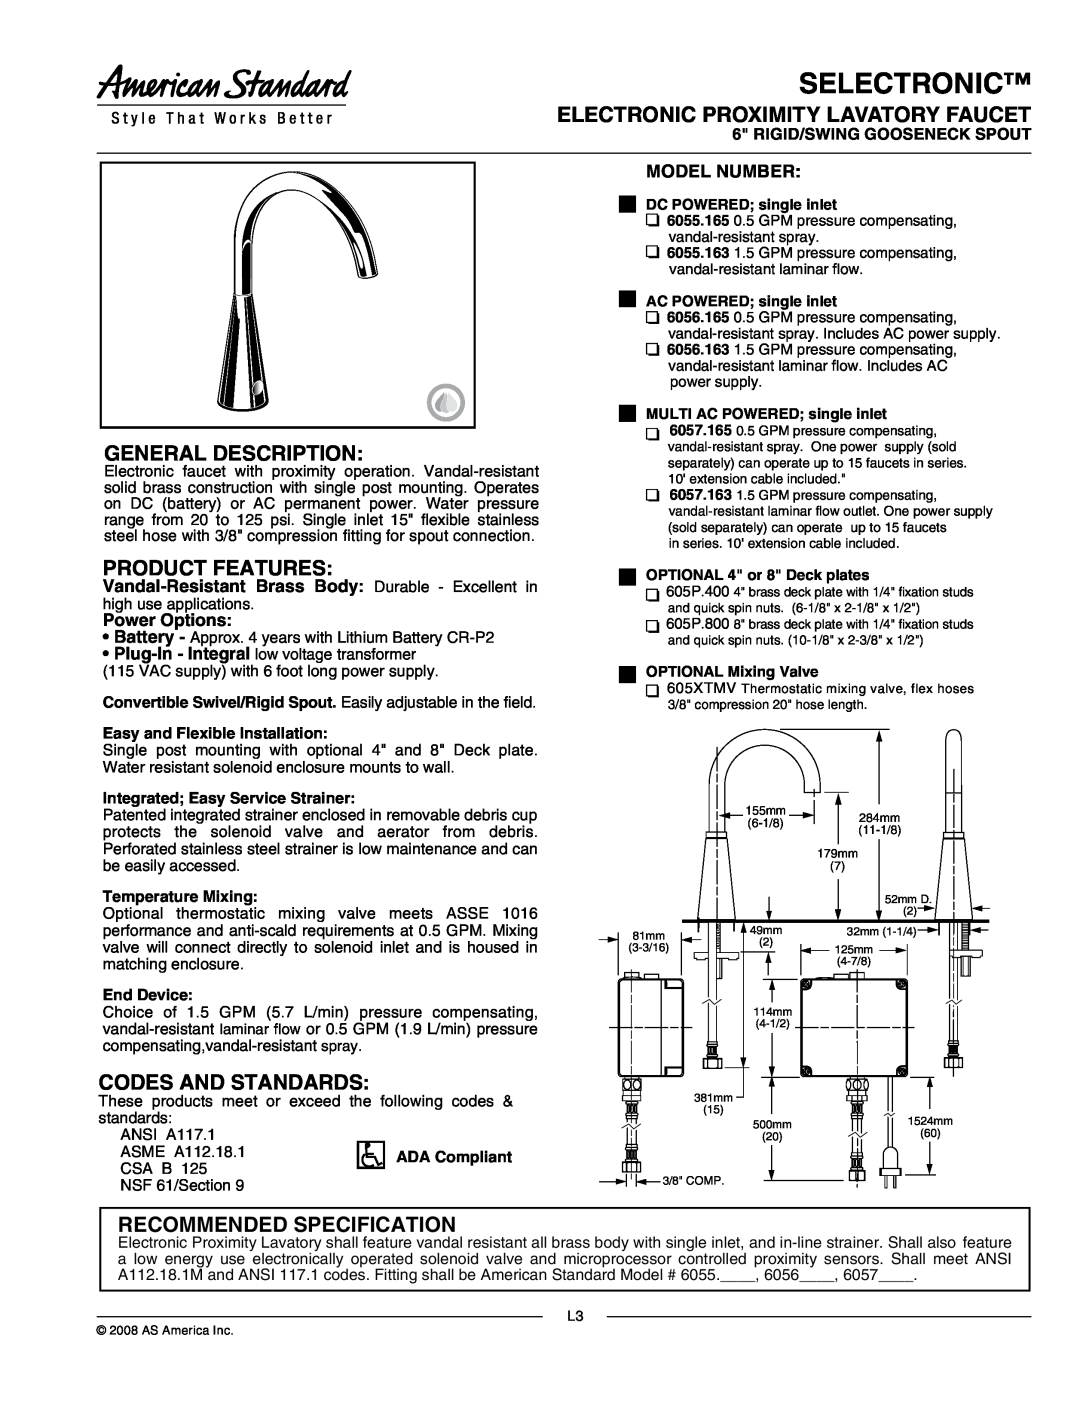 American Standard 6056.163 manual Selectronic, Electronic Proximity Lavatory Faucet, General Description, Product Features 